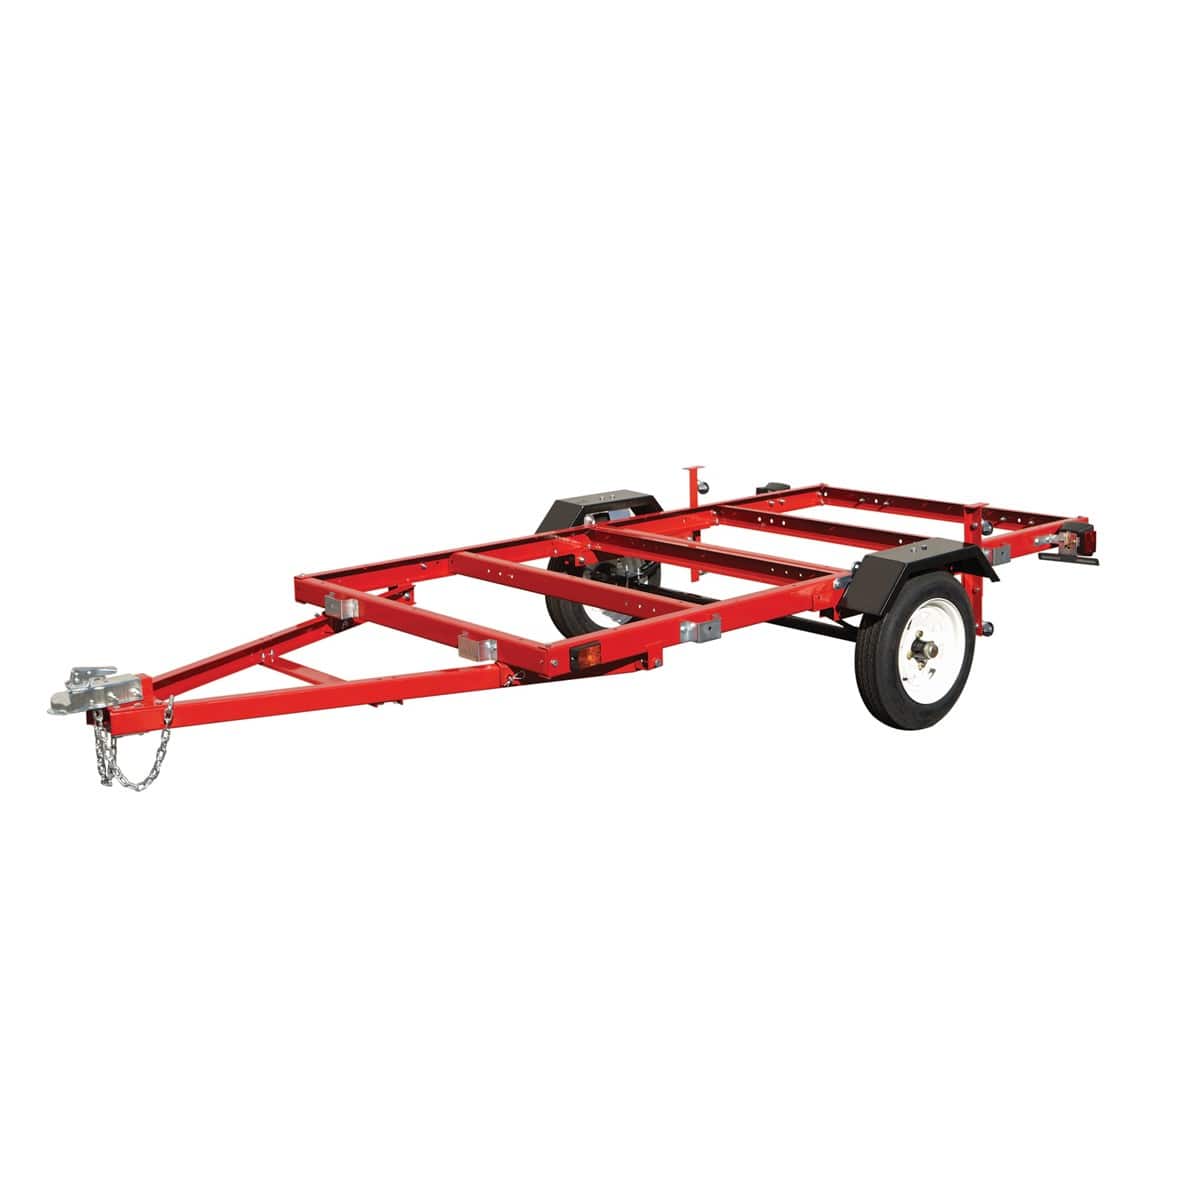 Harbor Freight 1720 Lb Capacity 48 In X 96 In Super Duty Folding Trailer 340 With